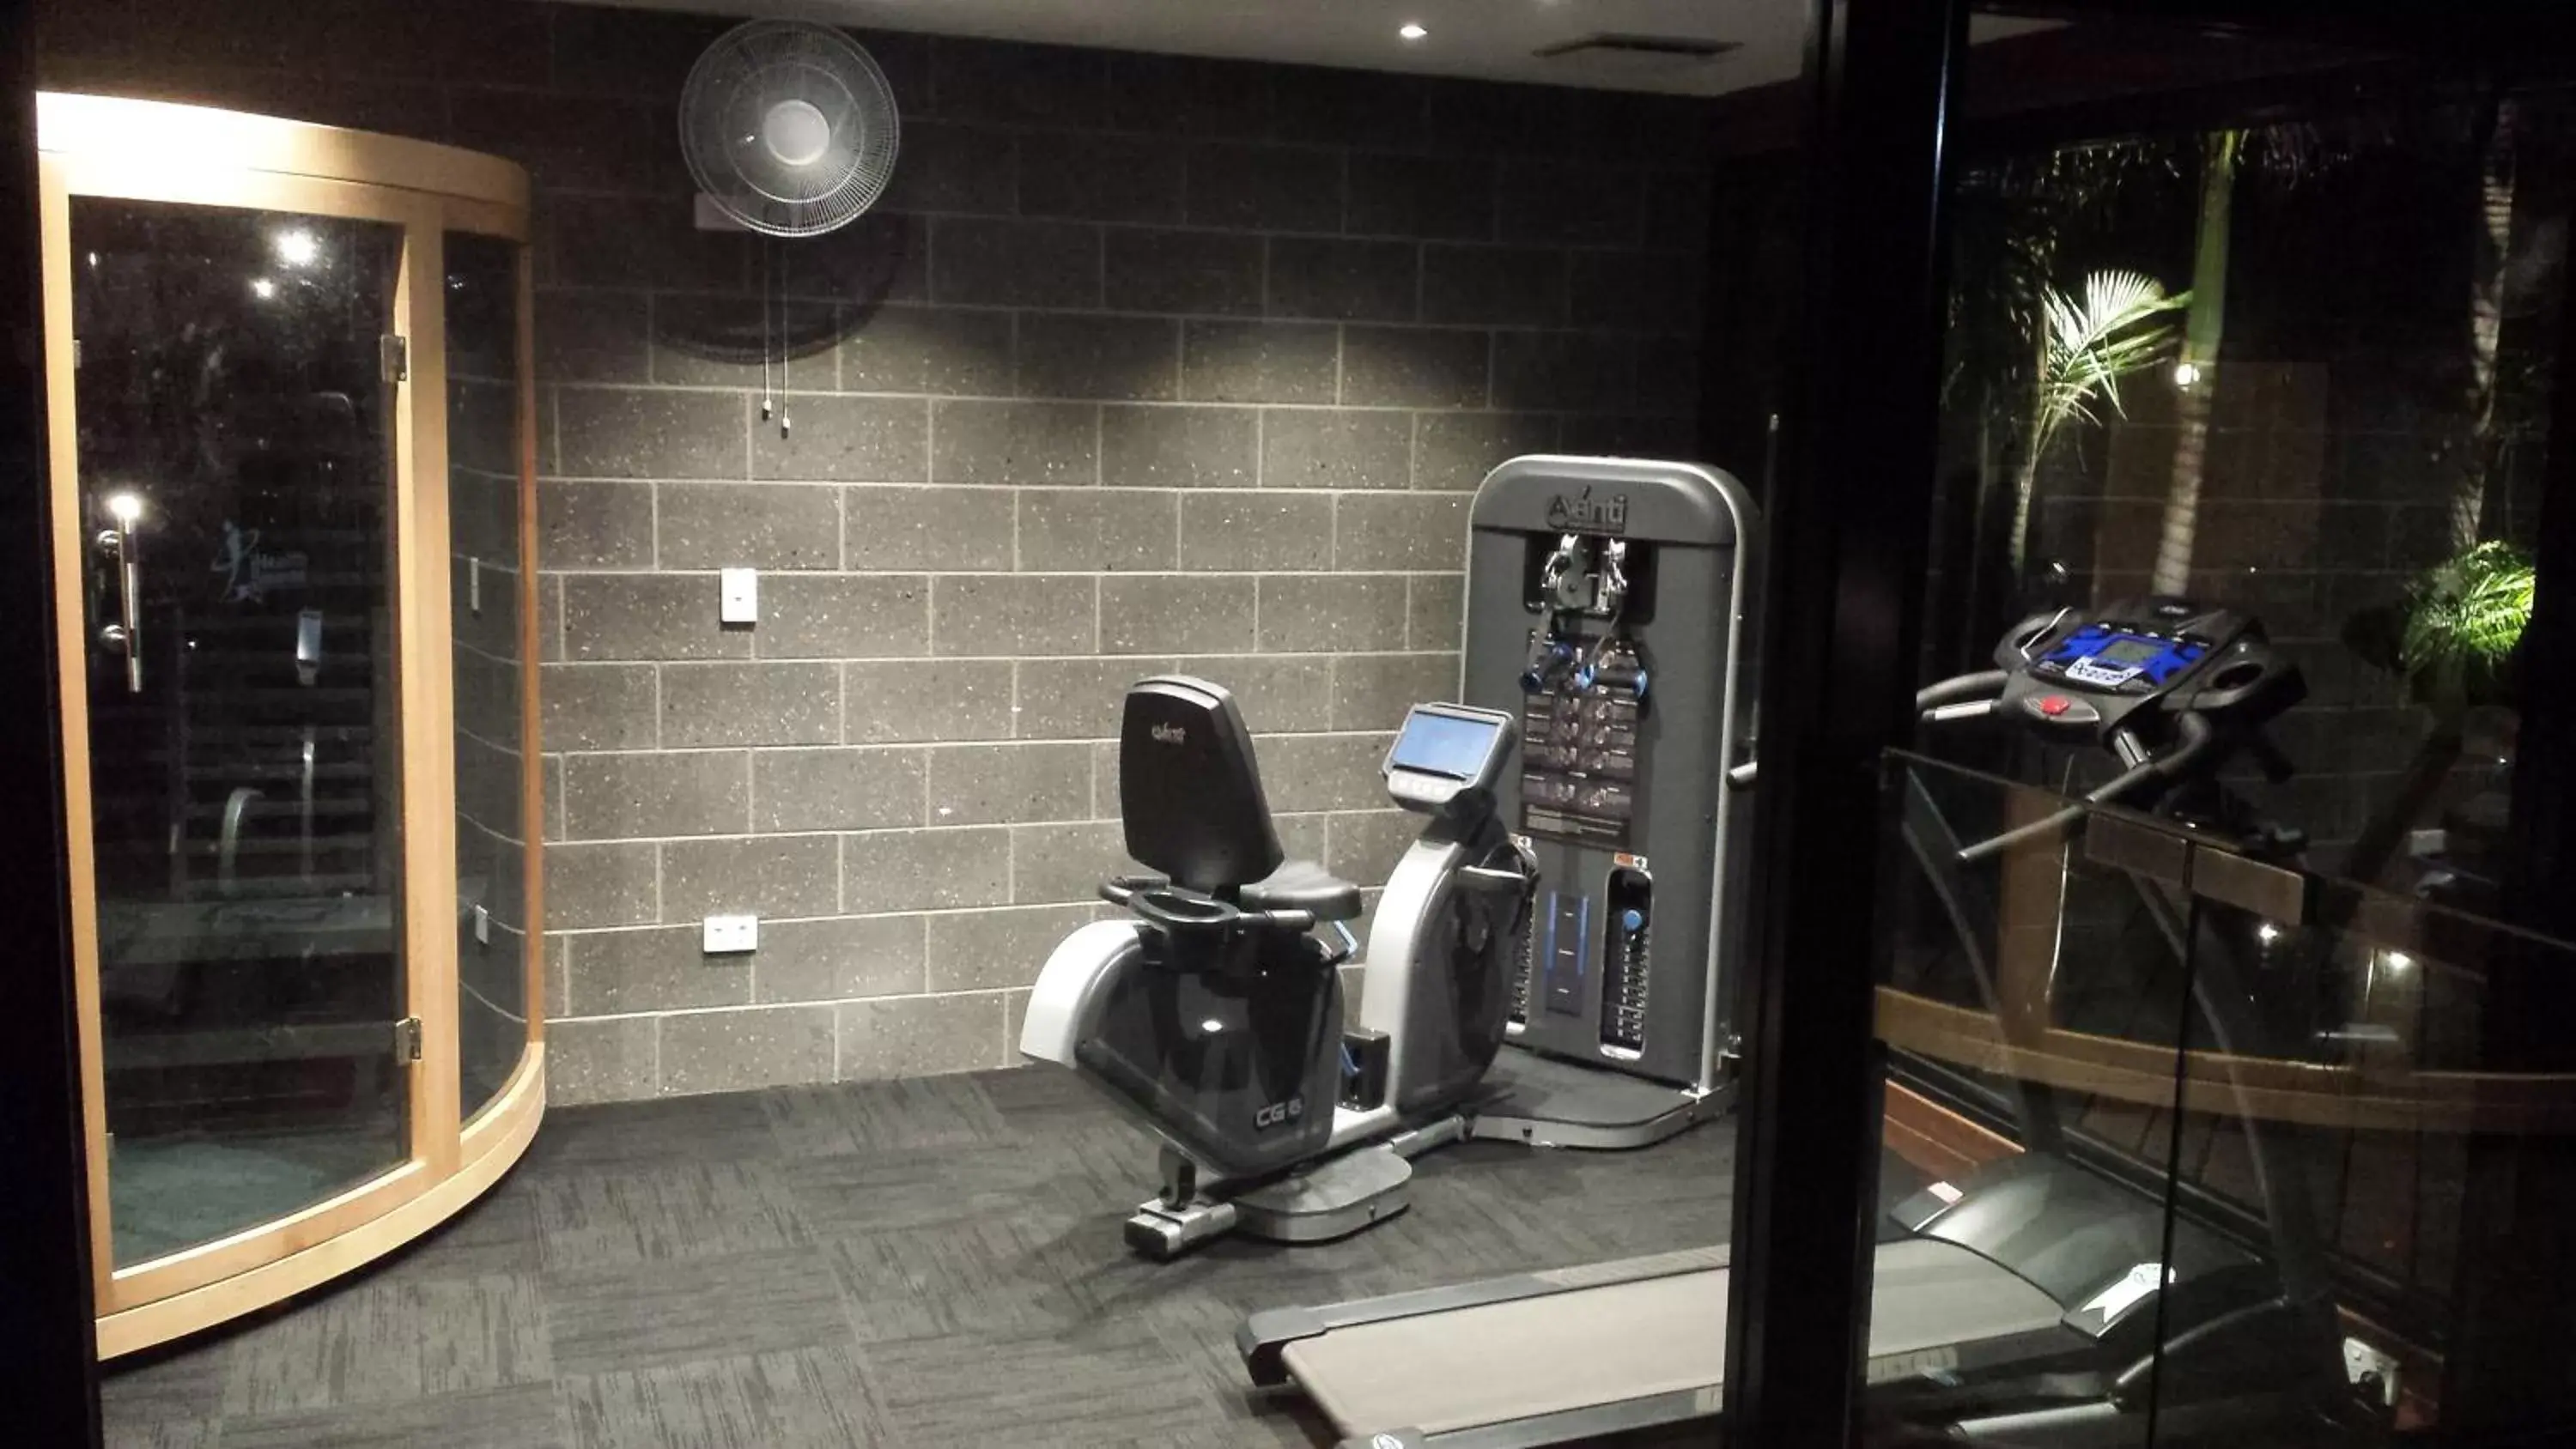 Fitness centre/facilities, Fitness Center/Facilities in McLaren Vale Motel & Apartments